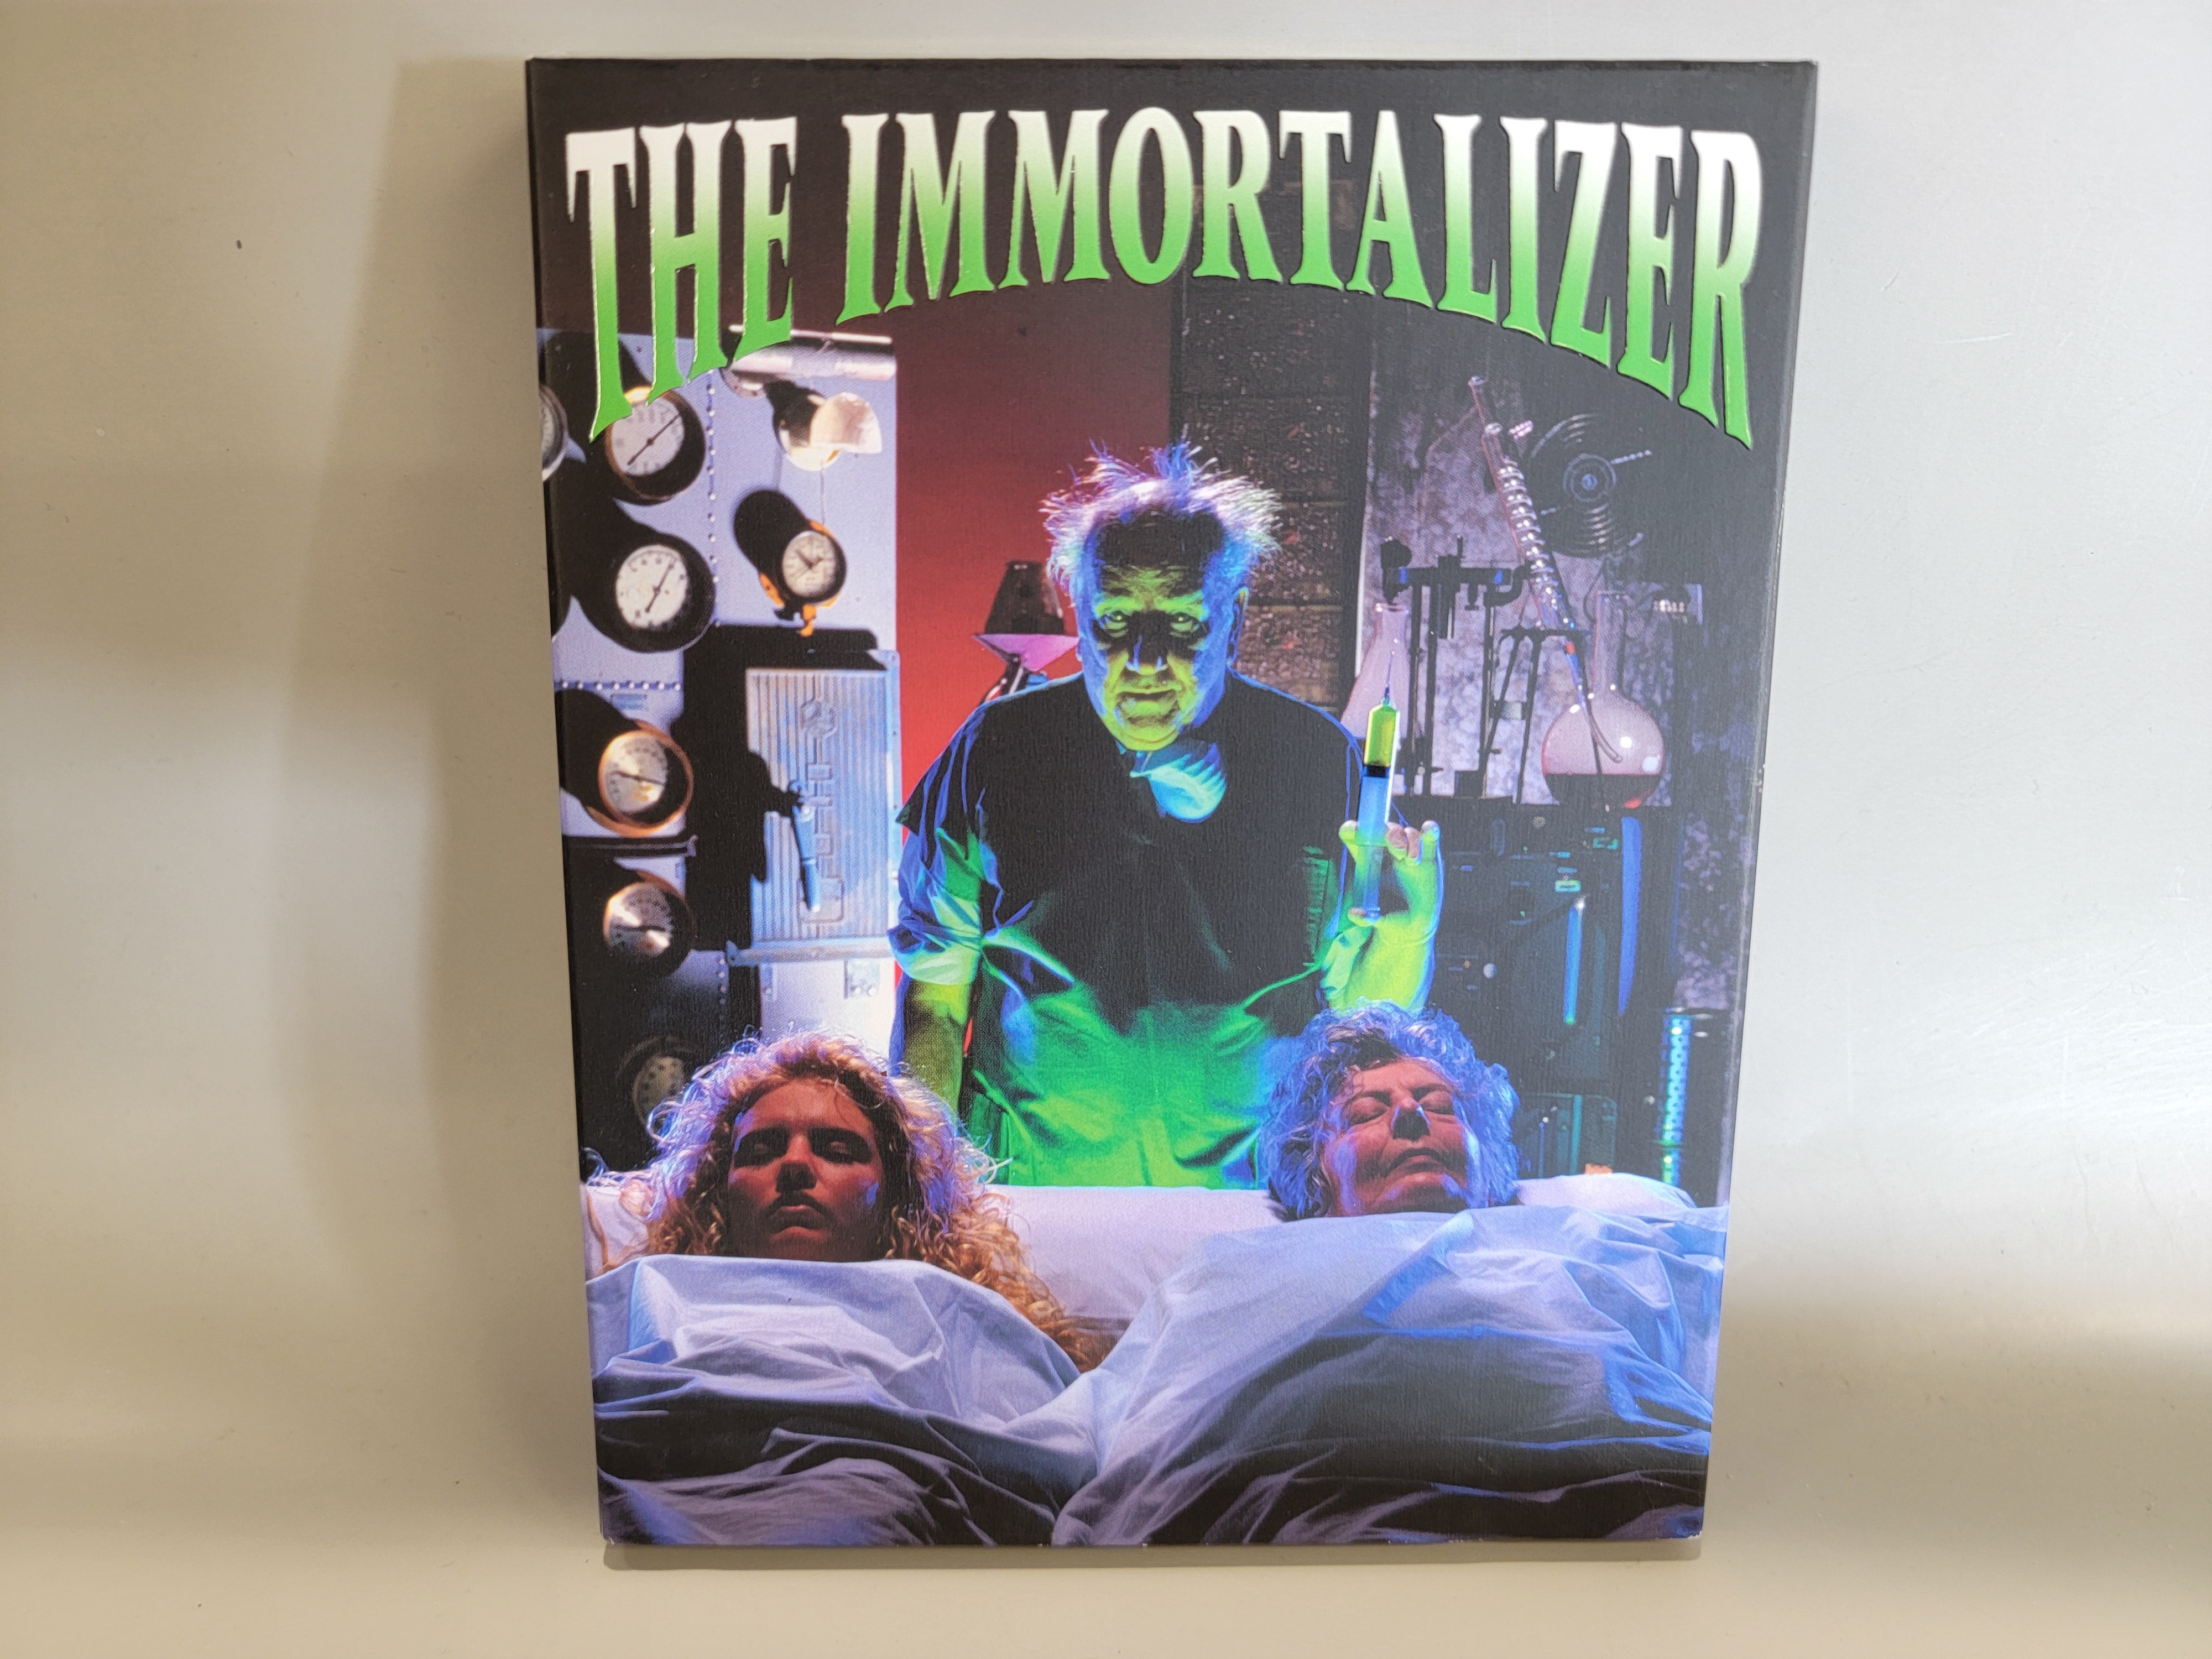 THE IMMORTALIZER (LIMITED EDITION) BLU-RAY [USED]